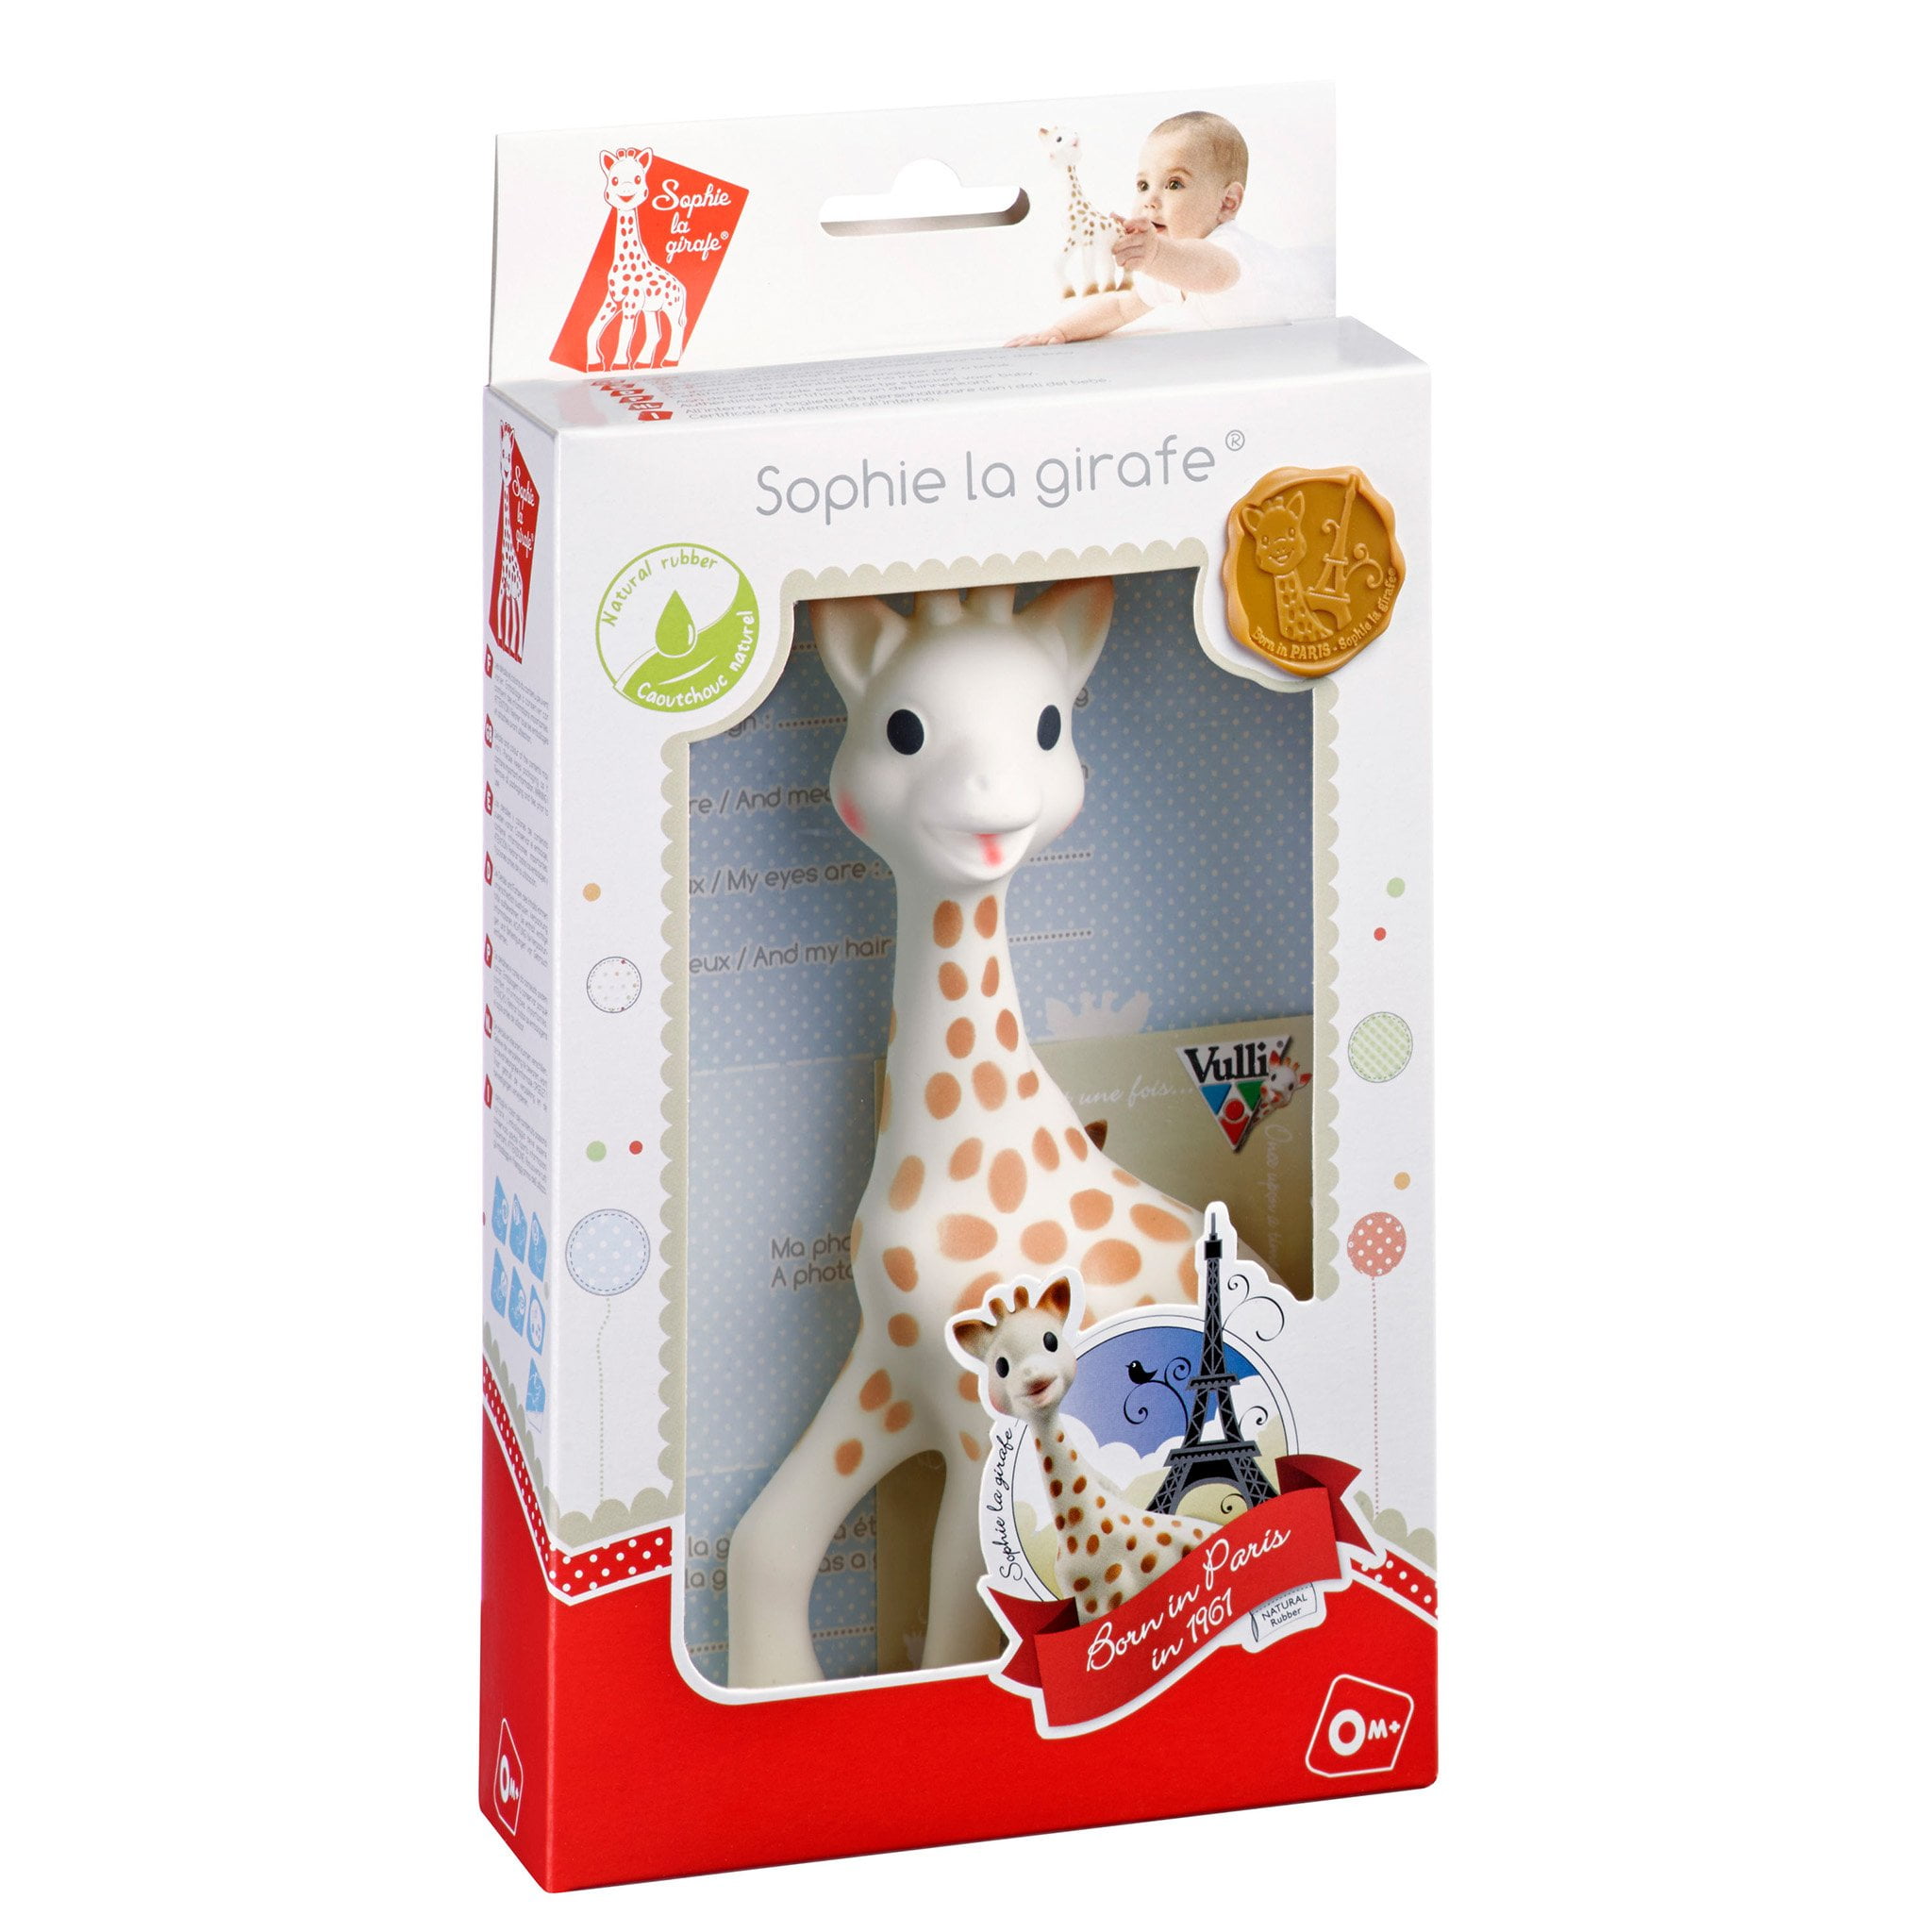 Sophie the Giraffe French baby Teether by Vulli New sophie authenfication code 